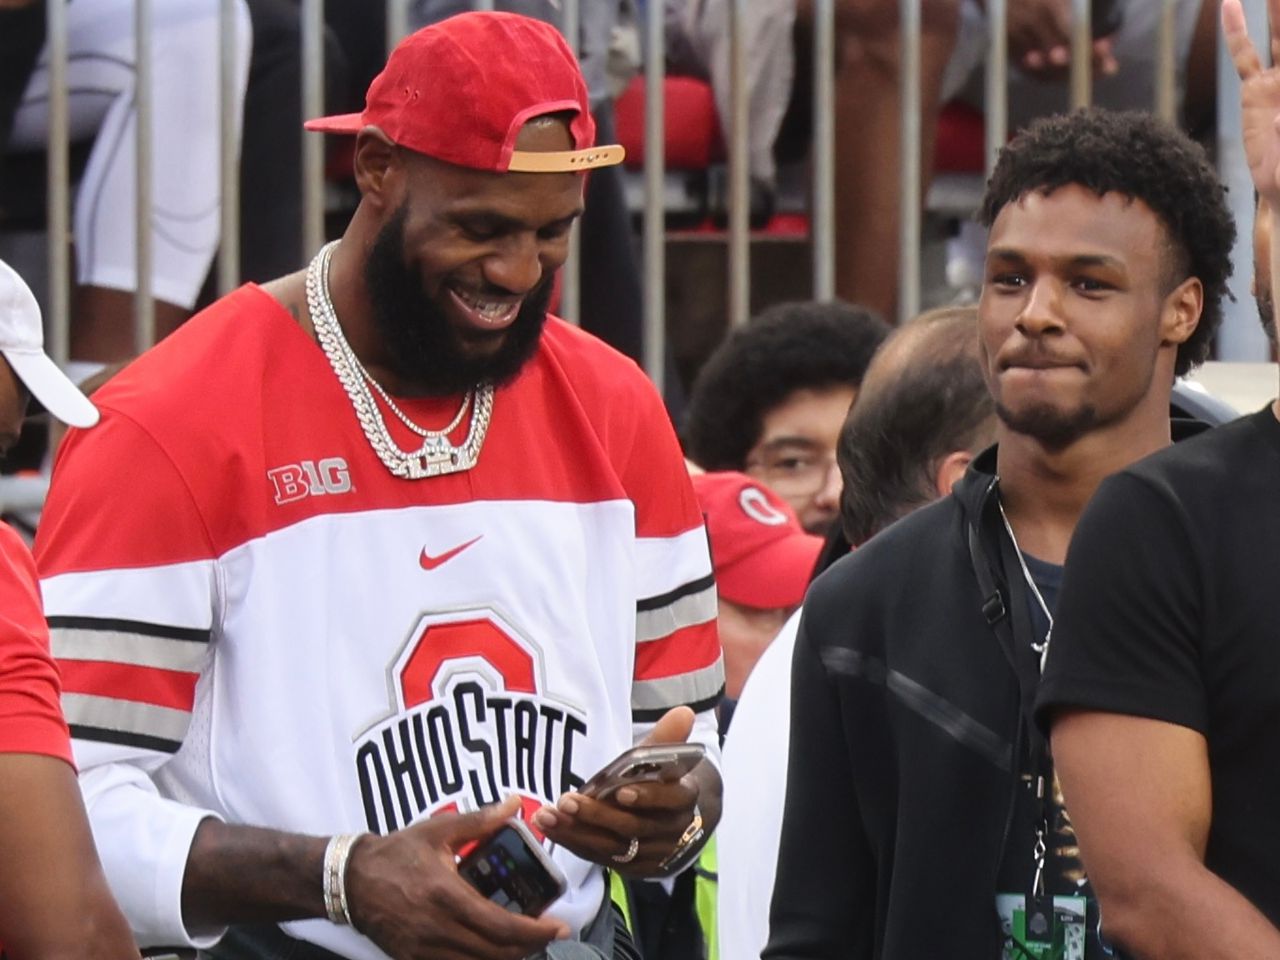 'It's happiness to see they're together and smiling' - Fans praise LeBron James’ Son Bronny James Sets NFL Goals Next